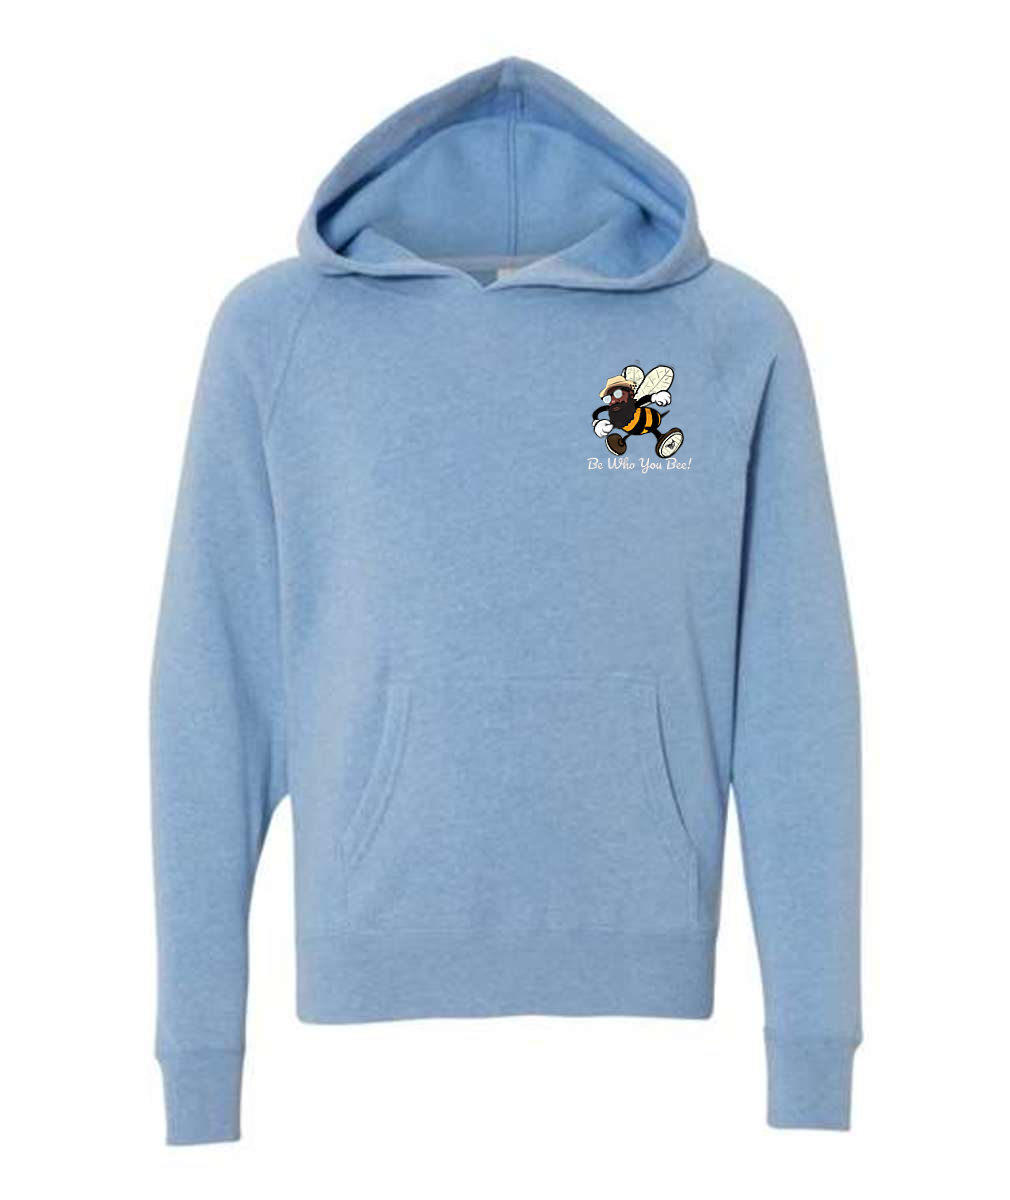 Be Who you Bee Embroidered Youth Special Blend Raglan Hooded Sweatshirt or Similar